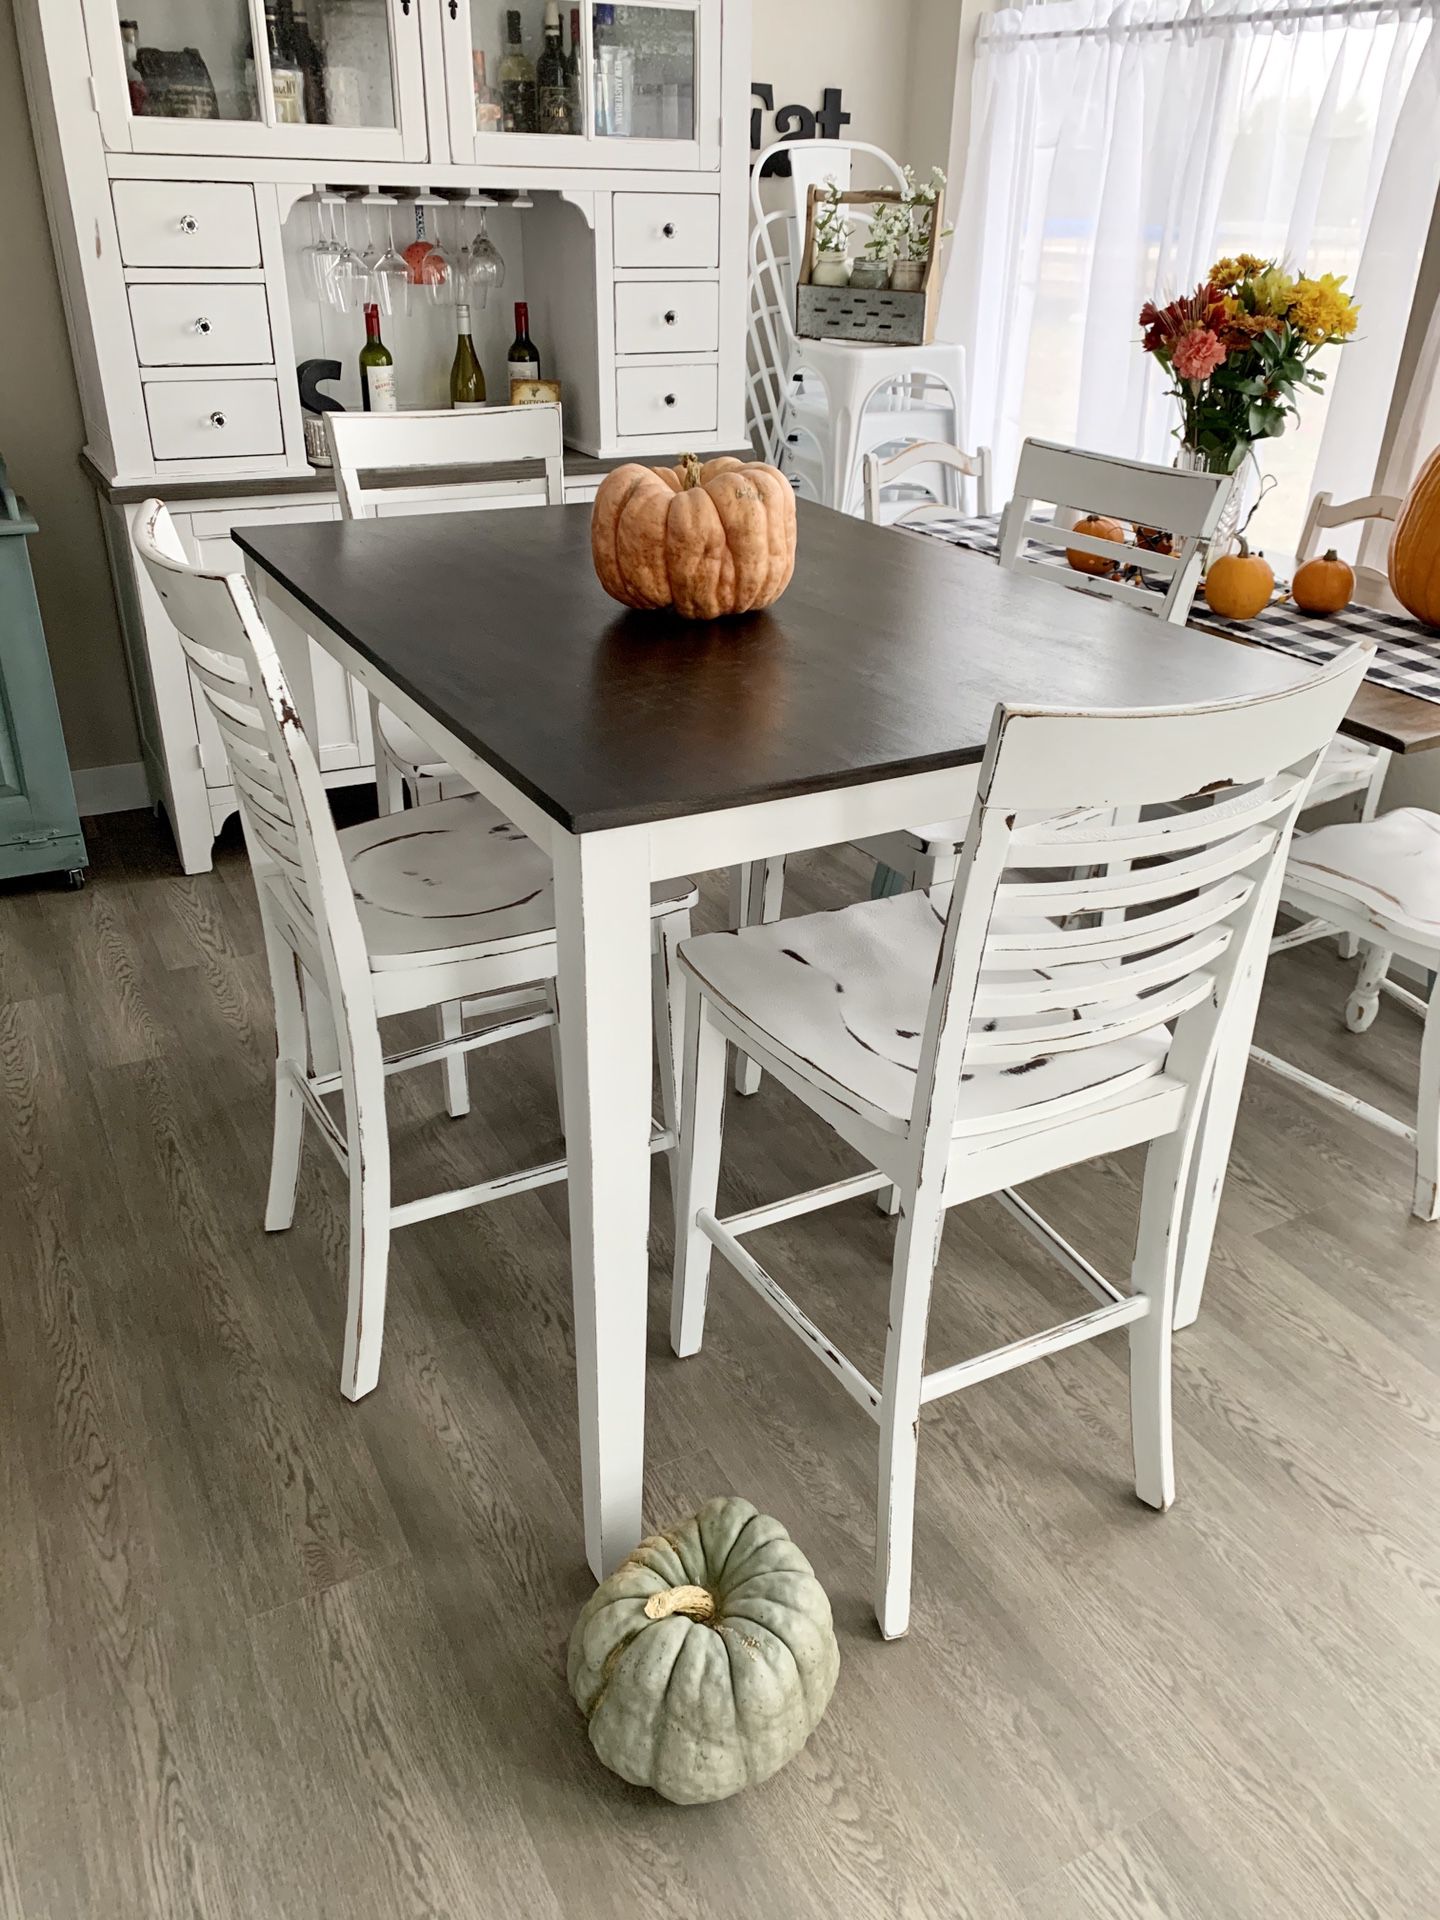 Shabby Kitchen dining table and 4 chairs